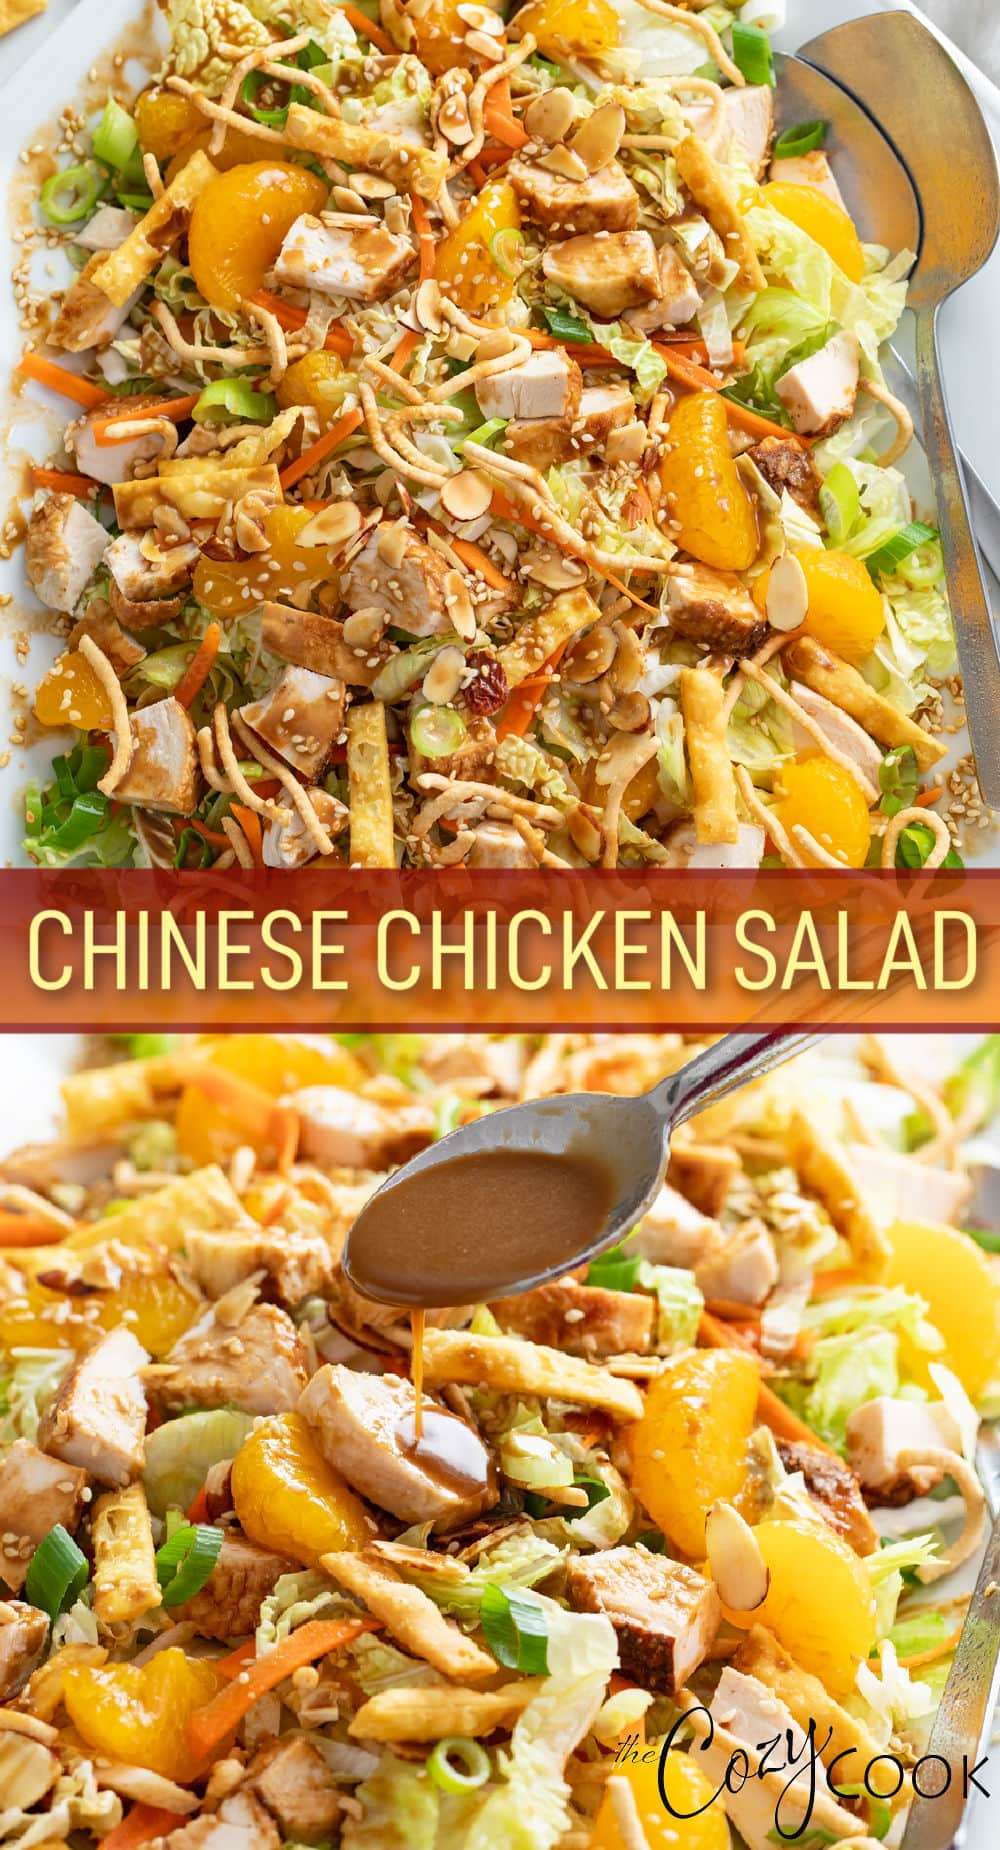 Chinese Chicken Salad - The Cozy Cook